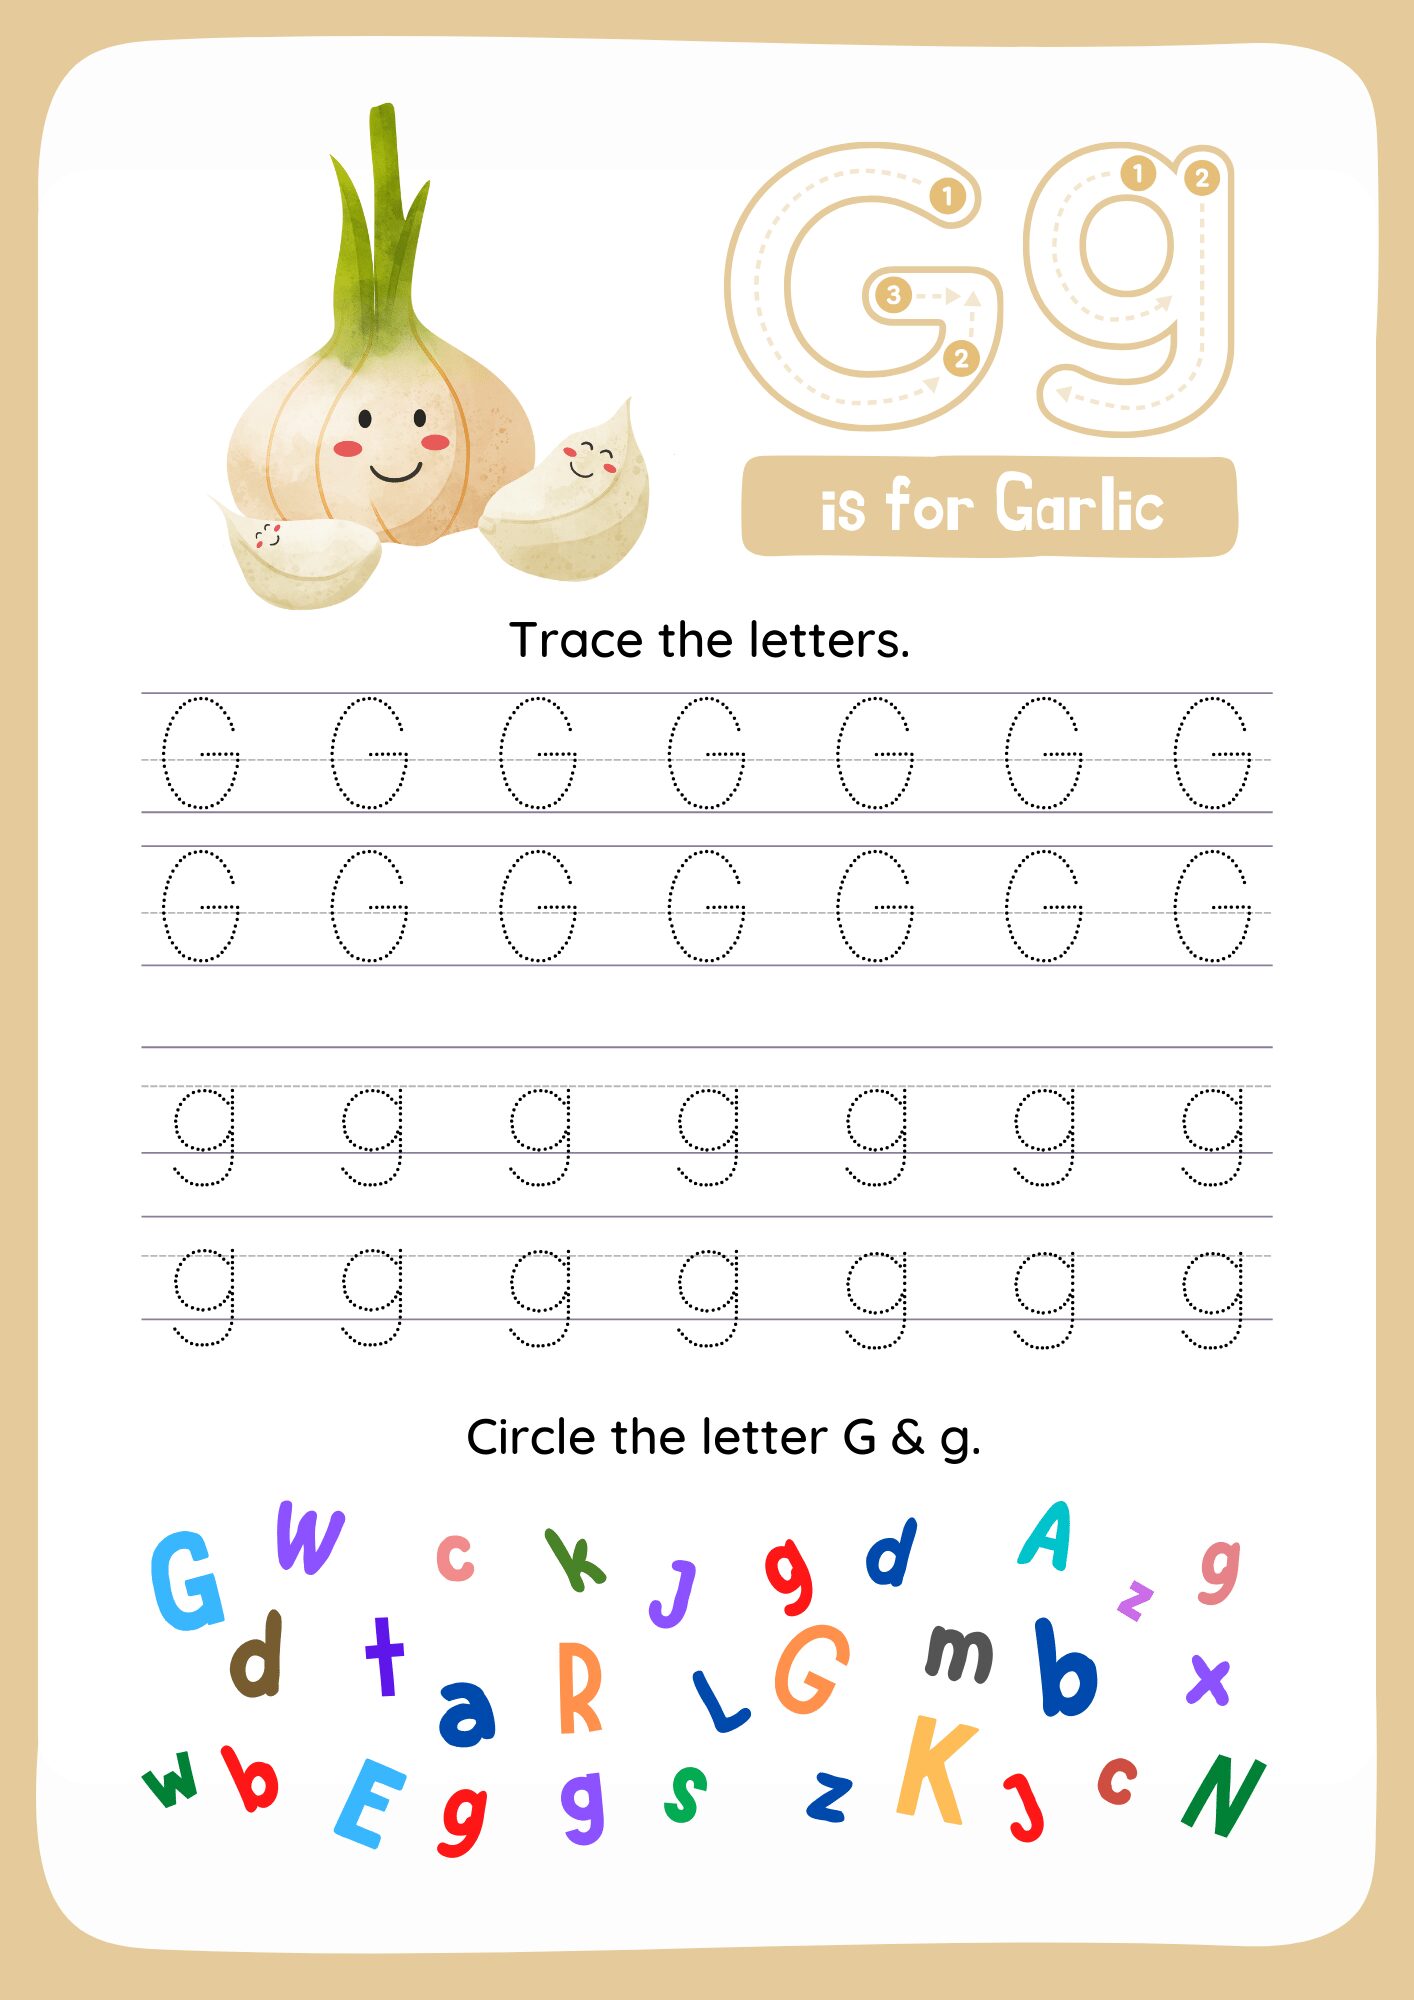 Gg Letters Tracing Worksheets. Trace the Words G and g.